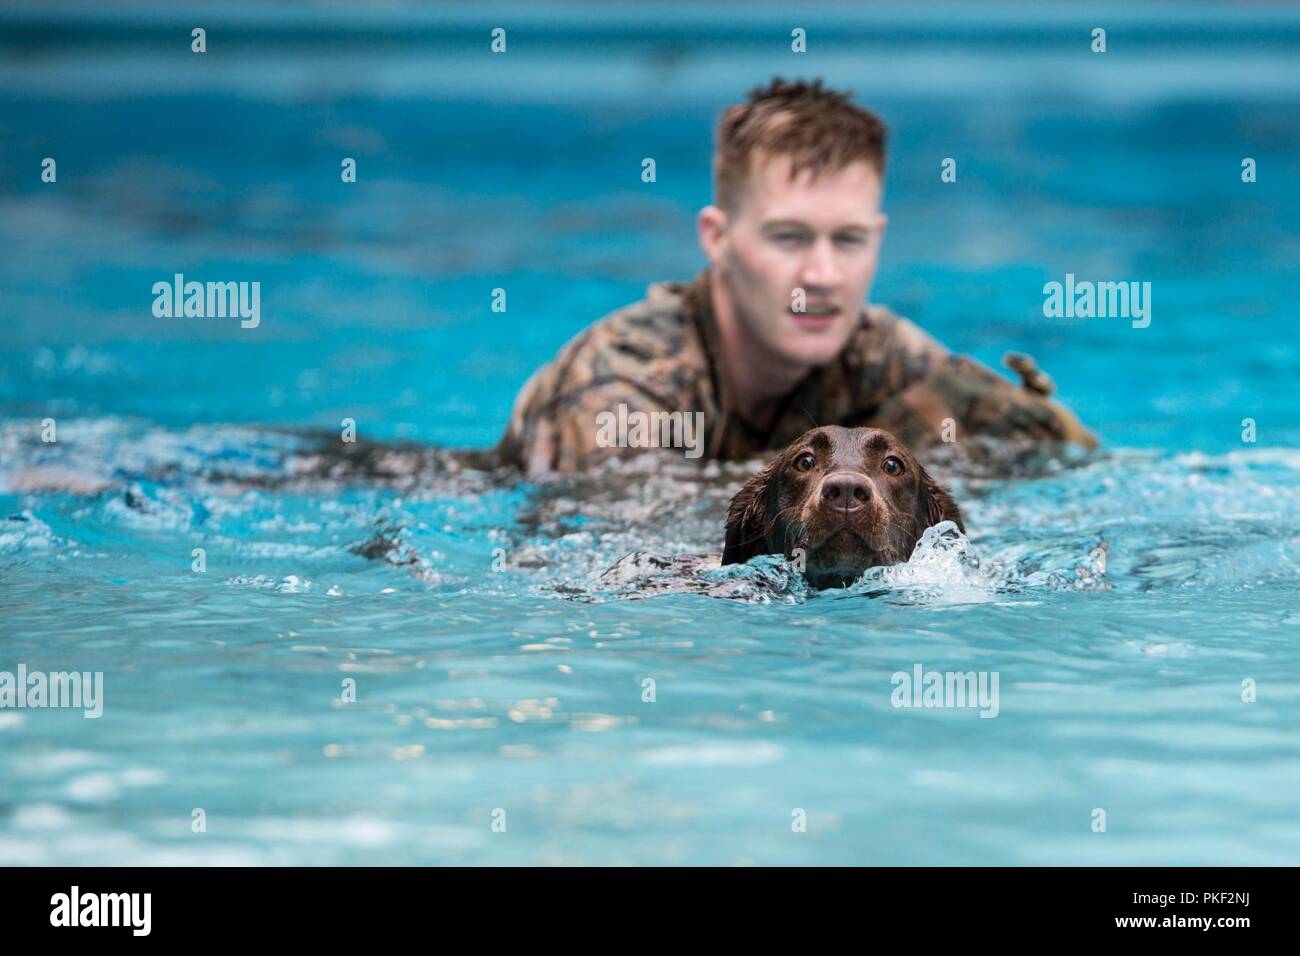 Corporal Kyle Cary, a 2nd Law Enforcement Battalion military working dog-handler, supervises his dog, Brandy, as they swim in the Area 5 pool at Marine Corps Base Camp Lejeune, N.C., Aug. 3, 2018. 2nd LEB practiced aggression training as part of specialized training to familiarize their dogs with water. The 2nd LEB military working dogs benefit from this particular type of training due to not being exposed to water tactics during initial training periods and become better accustomed to performing duties in atypical situations. Stock Photo